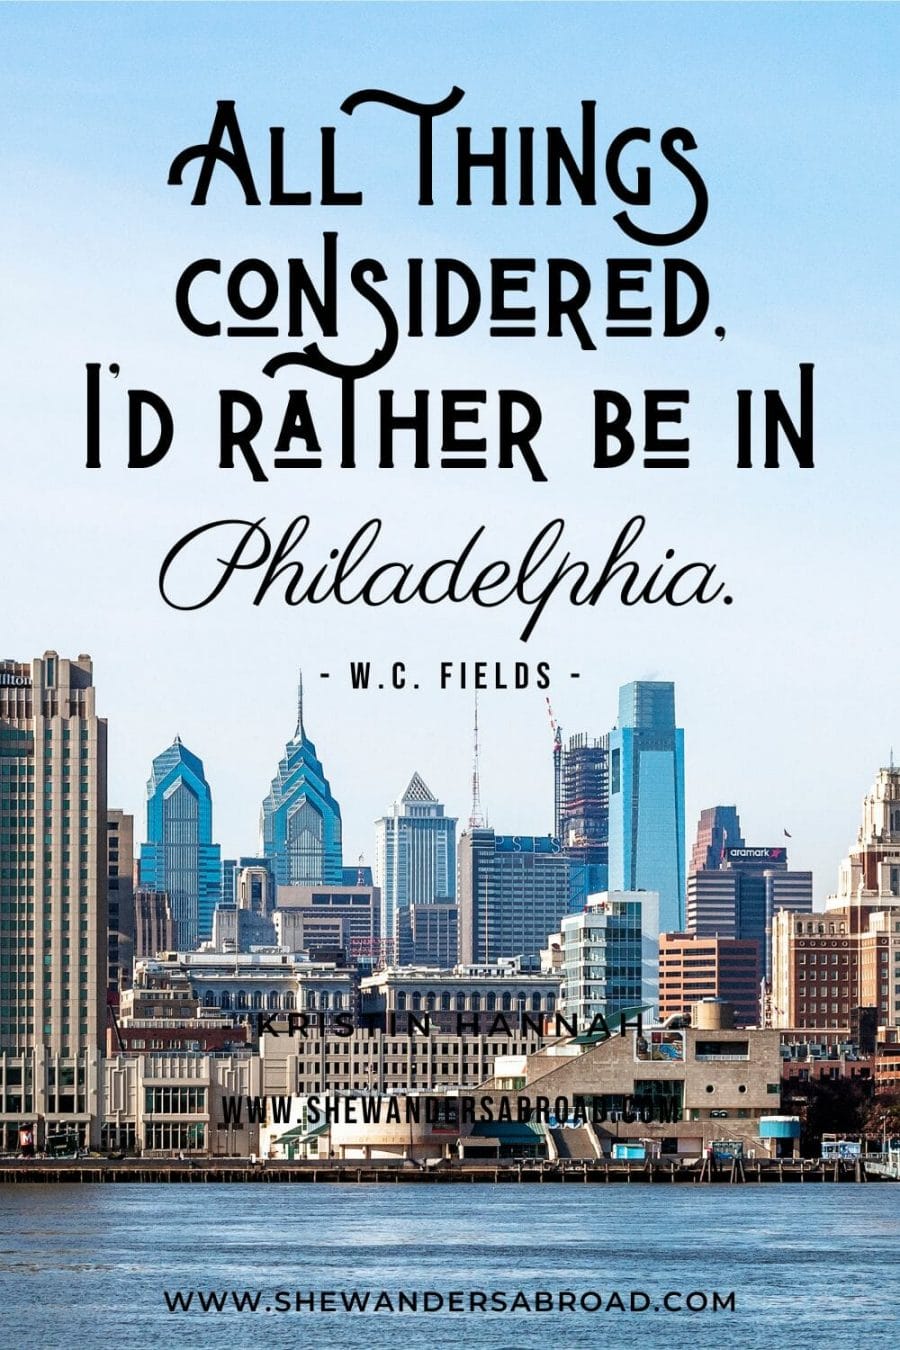 Best Quotes About Philadelphia for Instagram